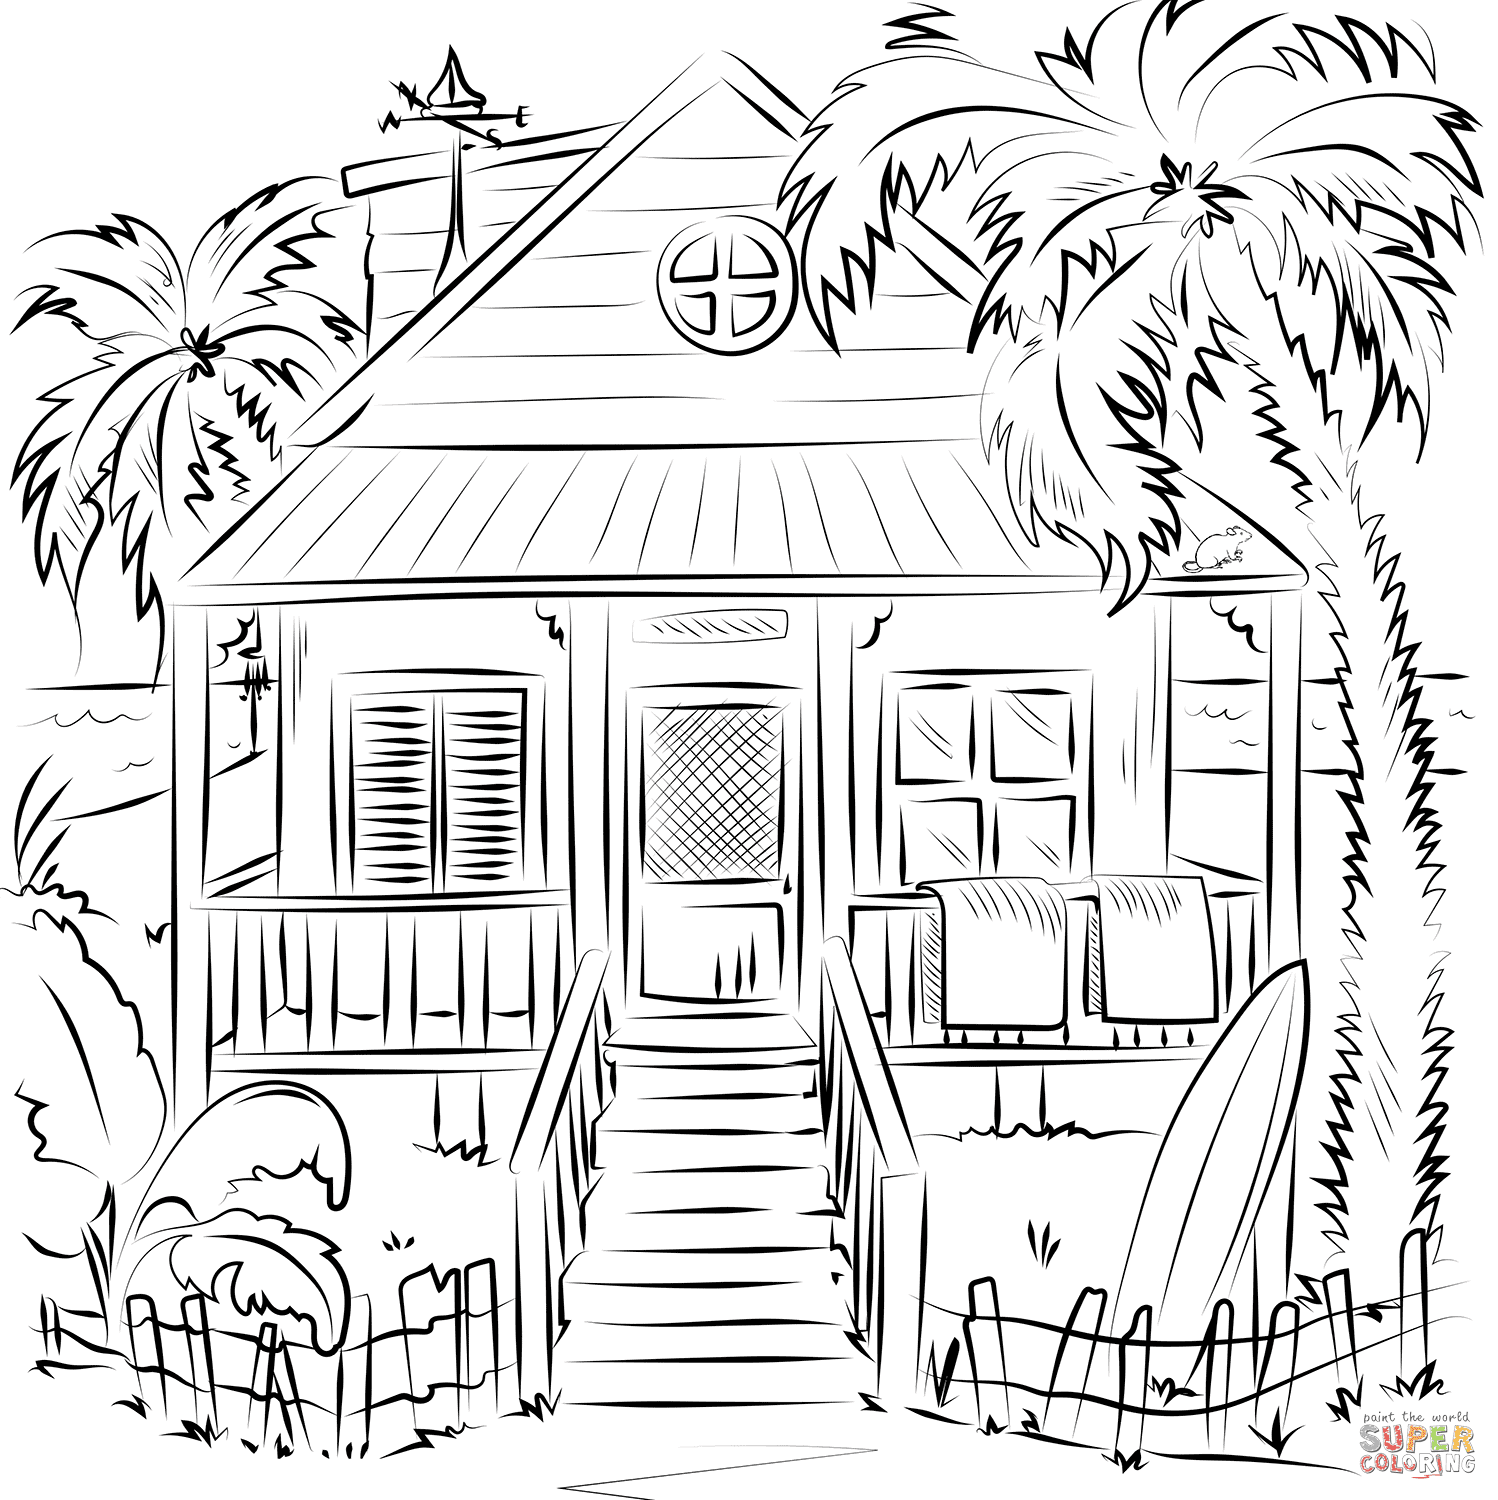 Coloring Pages House - for you